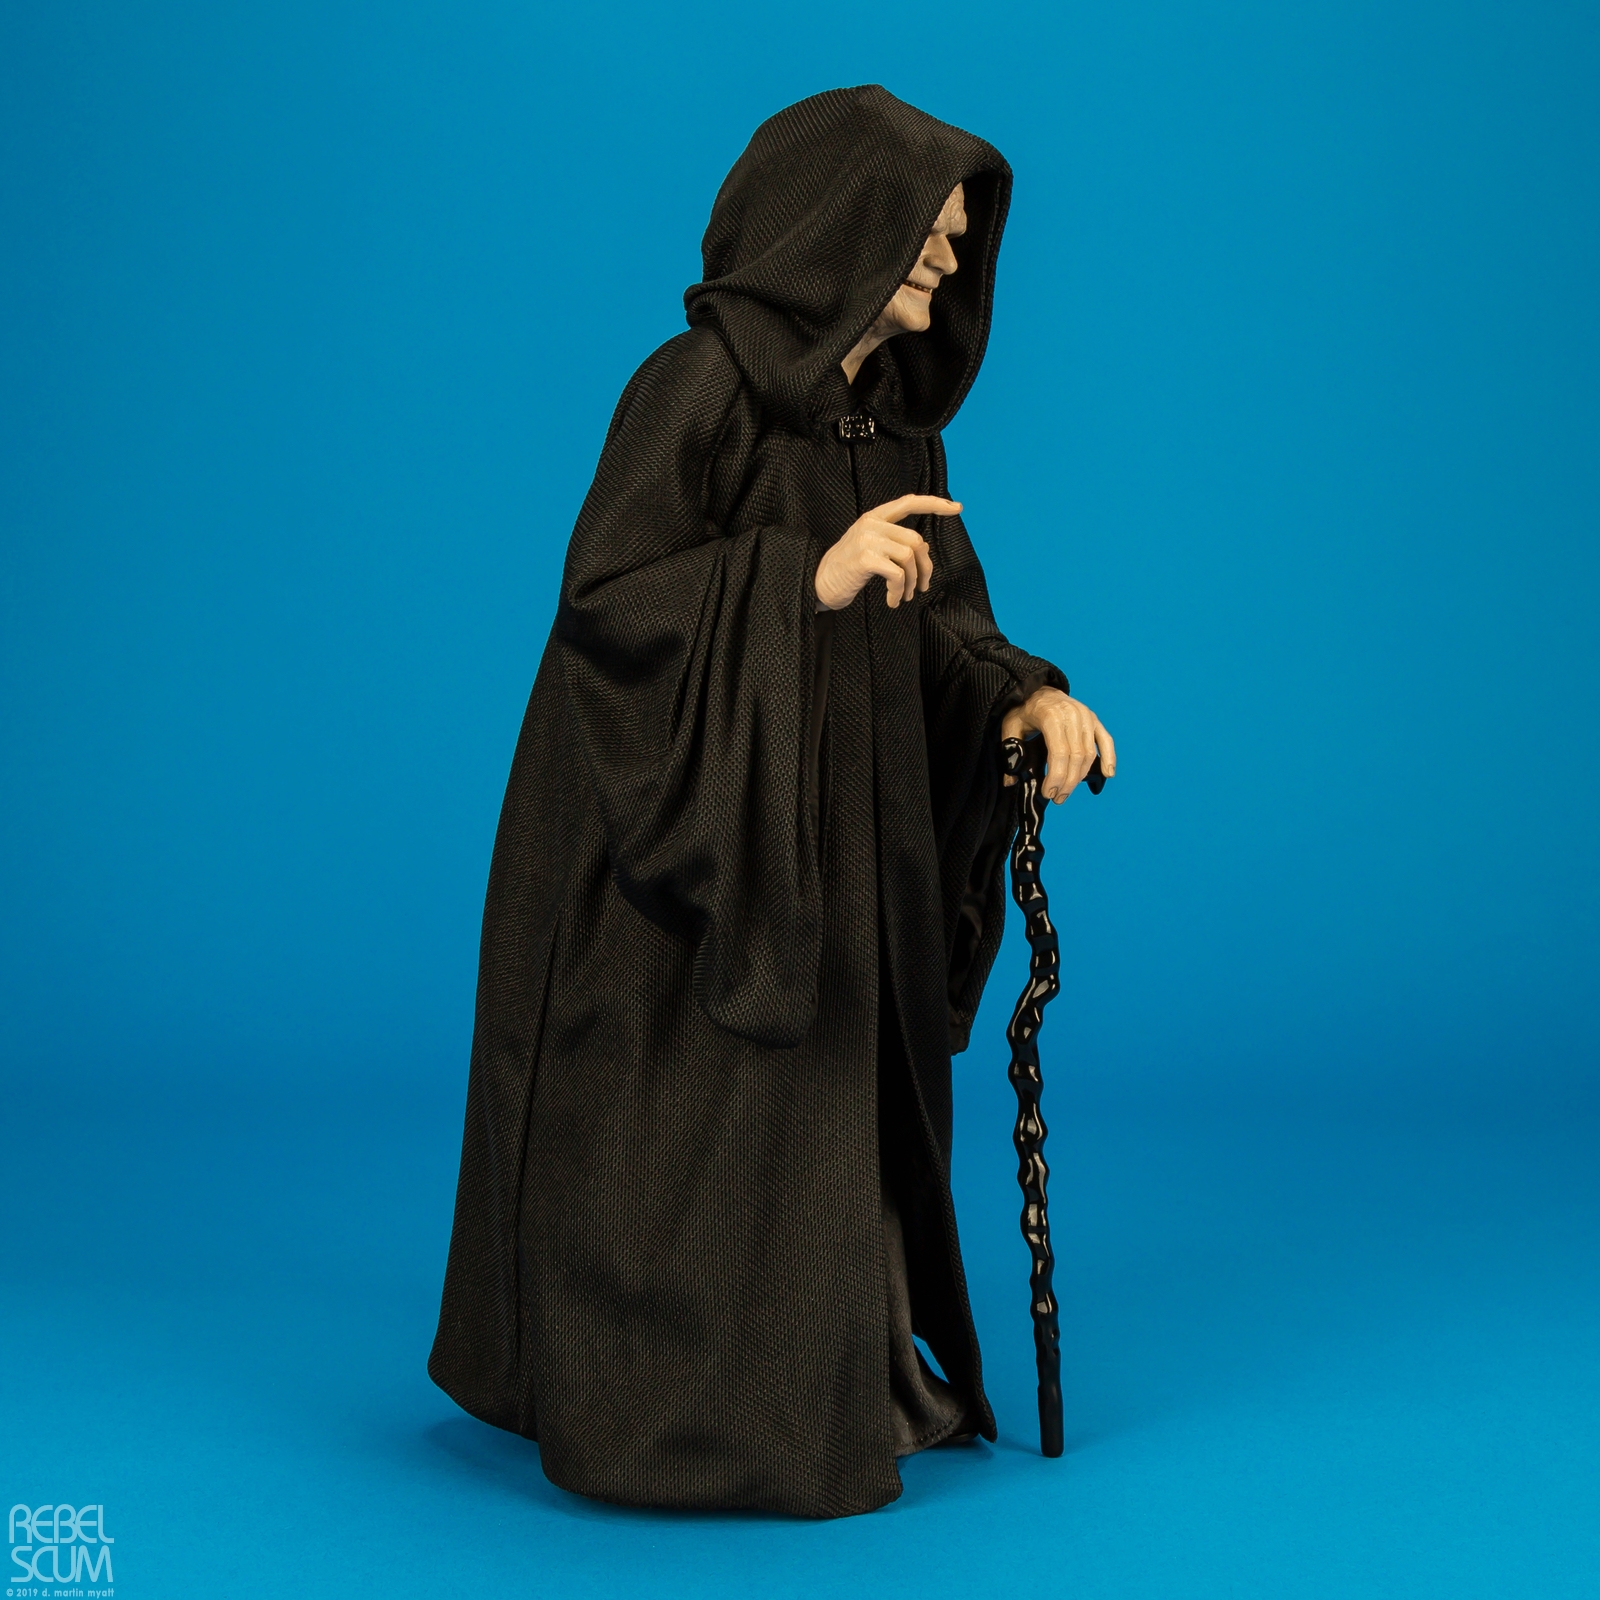 Emperor-Palpatine-Deluxe-Version-MMS468-Hot-Toys-002.jpg